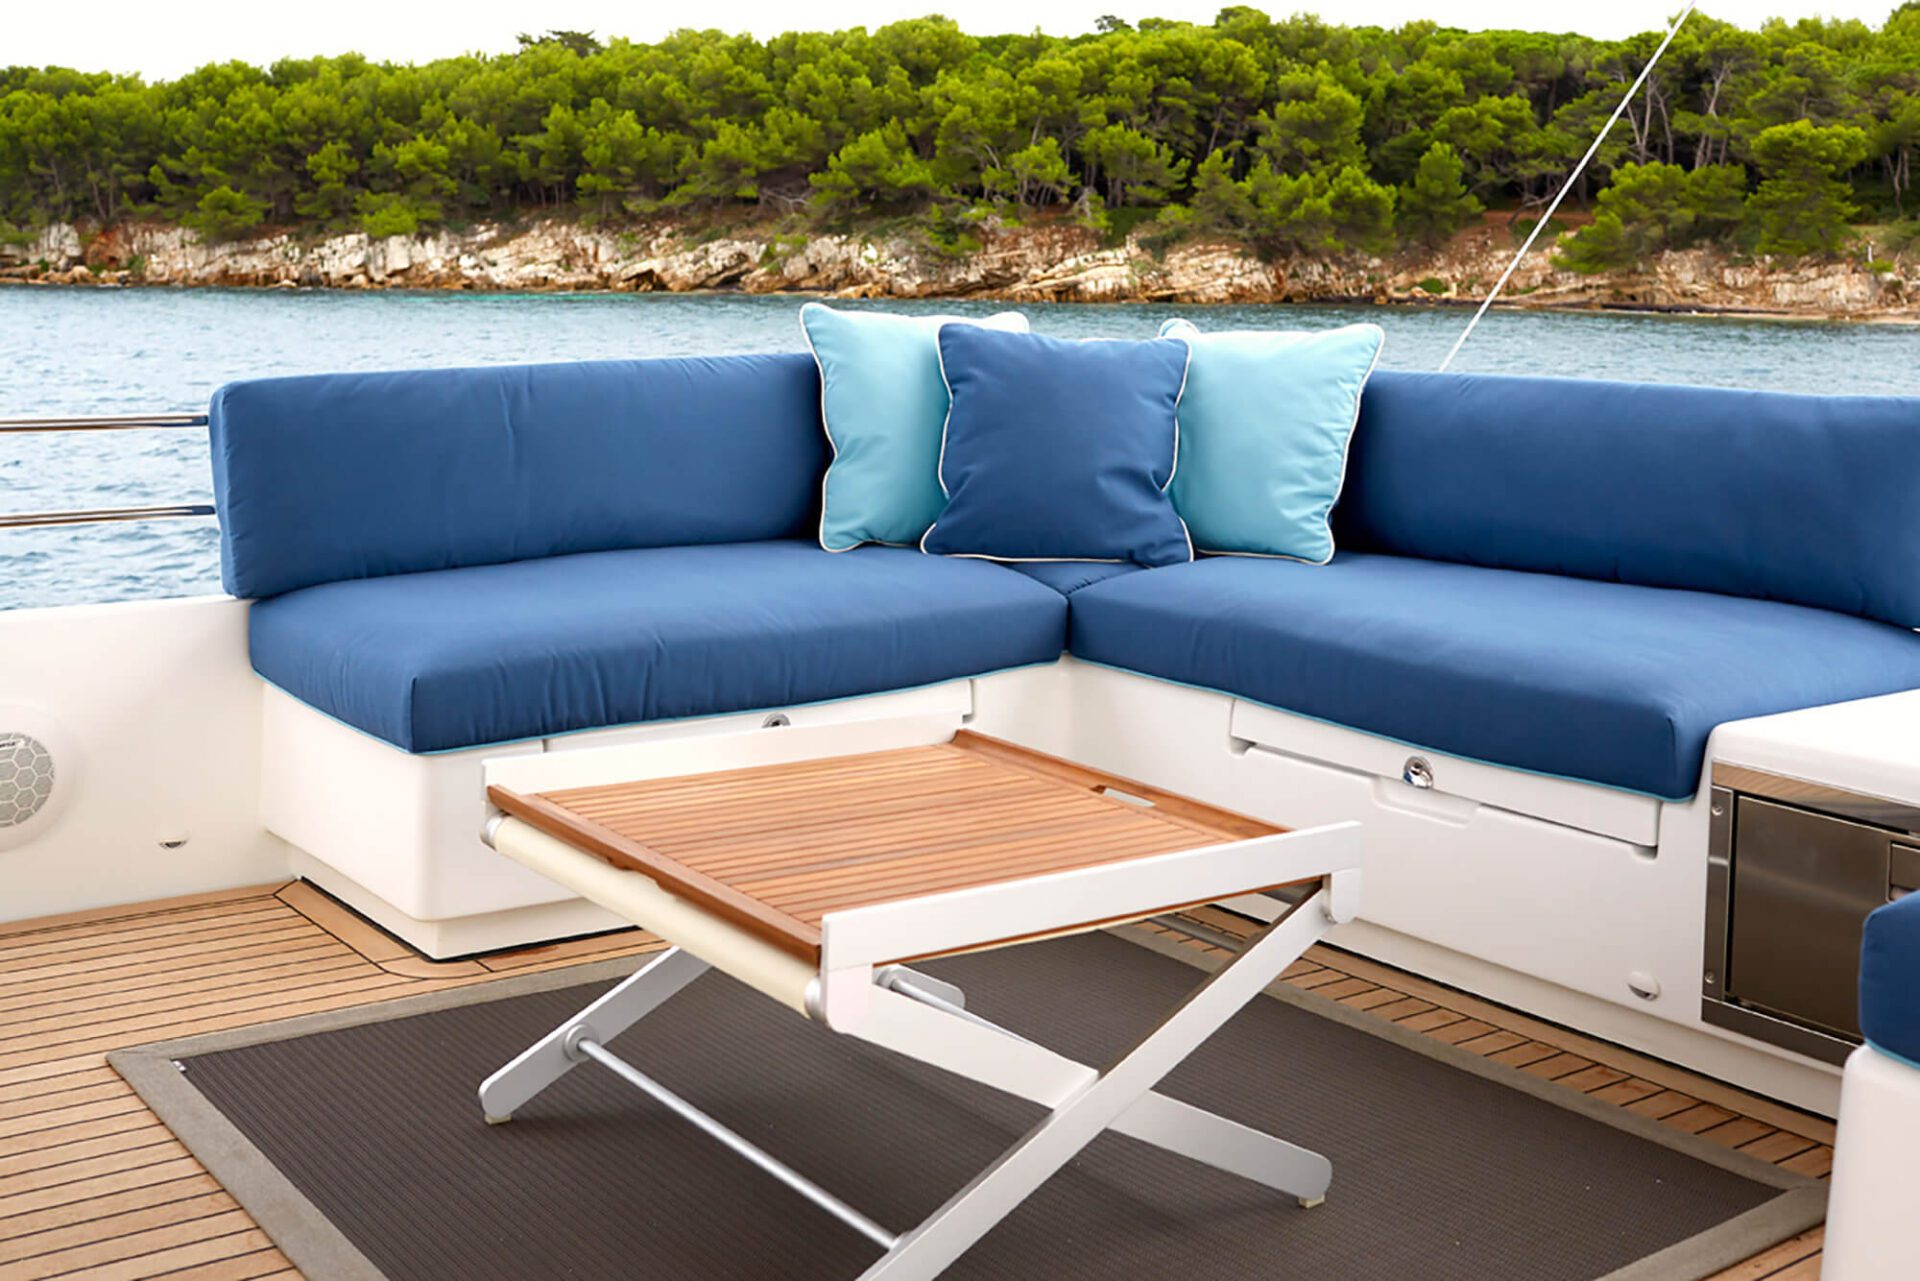 Sunbrella Pacific Blue Canvas for outdoor seating.